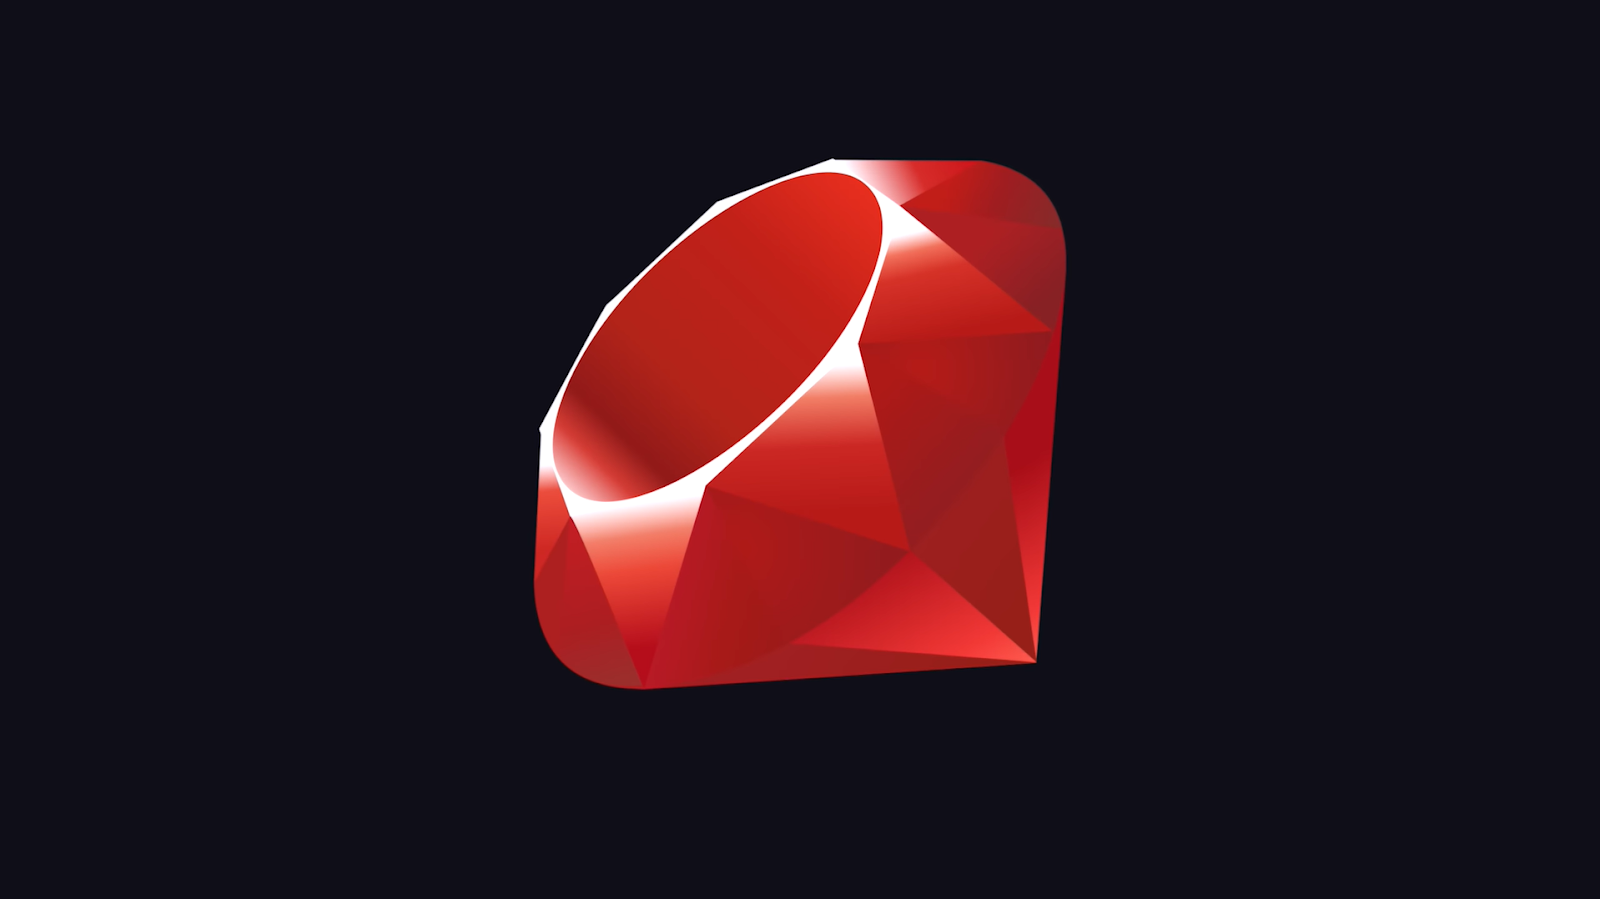 A stylized red ruby graphic on a black background